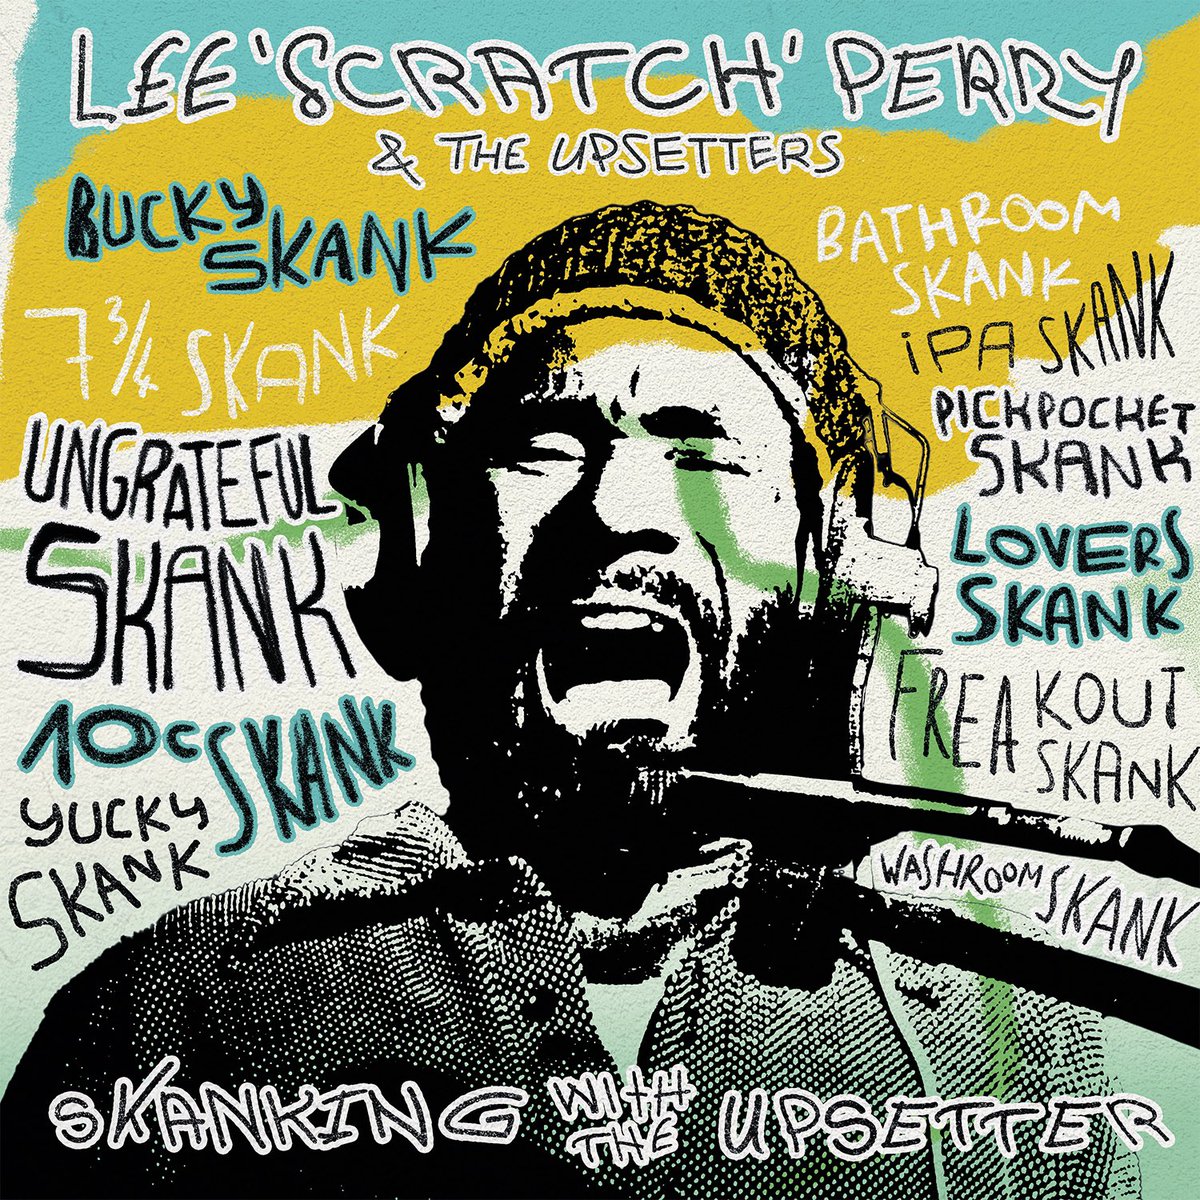 It’s Record Store Day! If you’re heading to your local record shop today look out for this exclusive #RSD24 release, ‘Skanking With The Upsetter’ by Lee “Sratch” Perry - the perfect record to be spinning on #420 @RSDUK